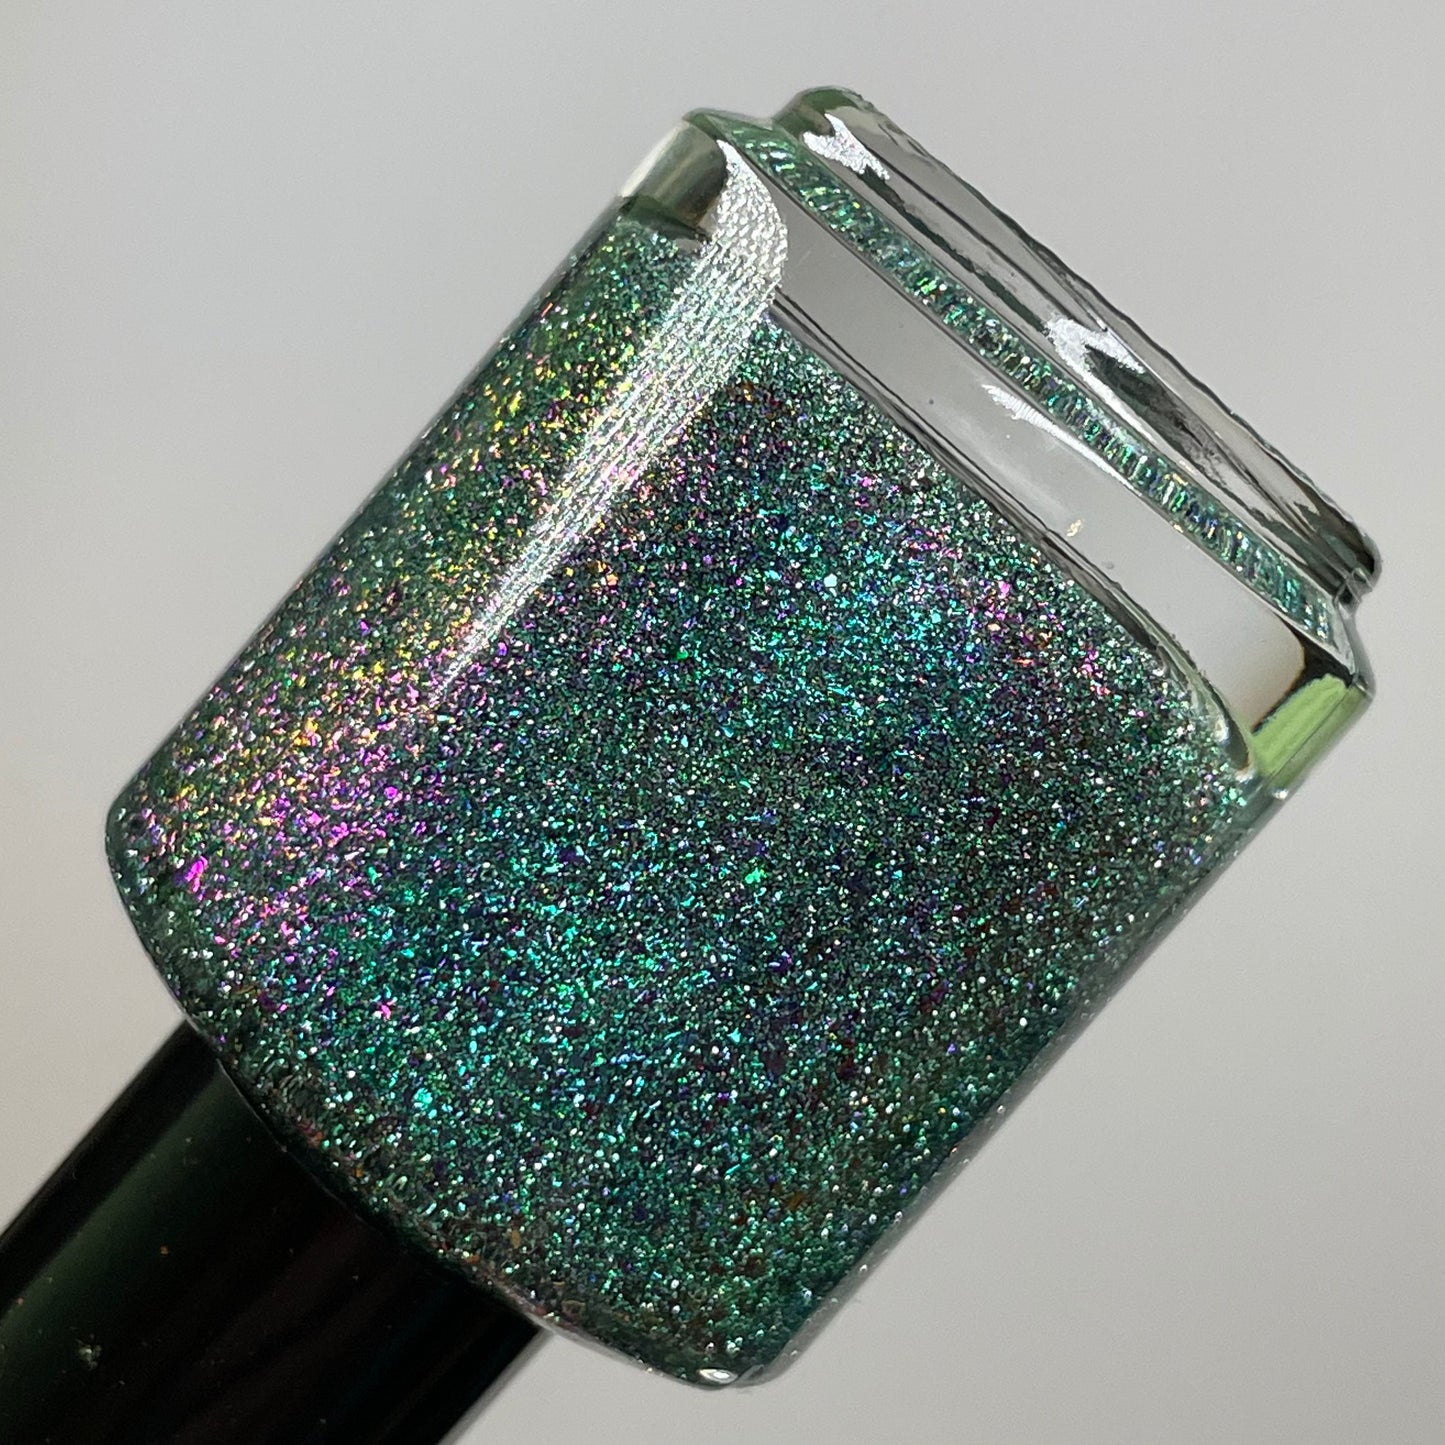 Permit to Hermit - Teal Flakie Nail Polish - Green Reflective Glitter - Home Sweet Home Trio